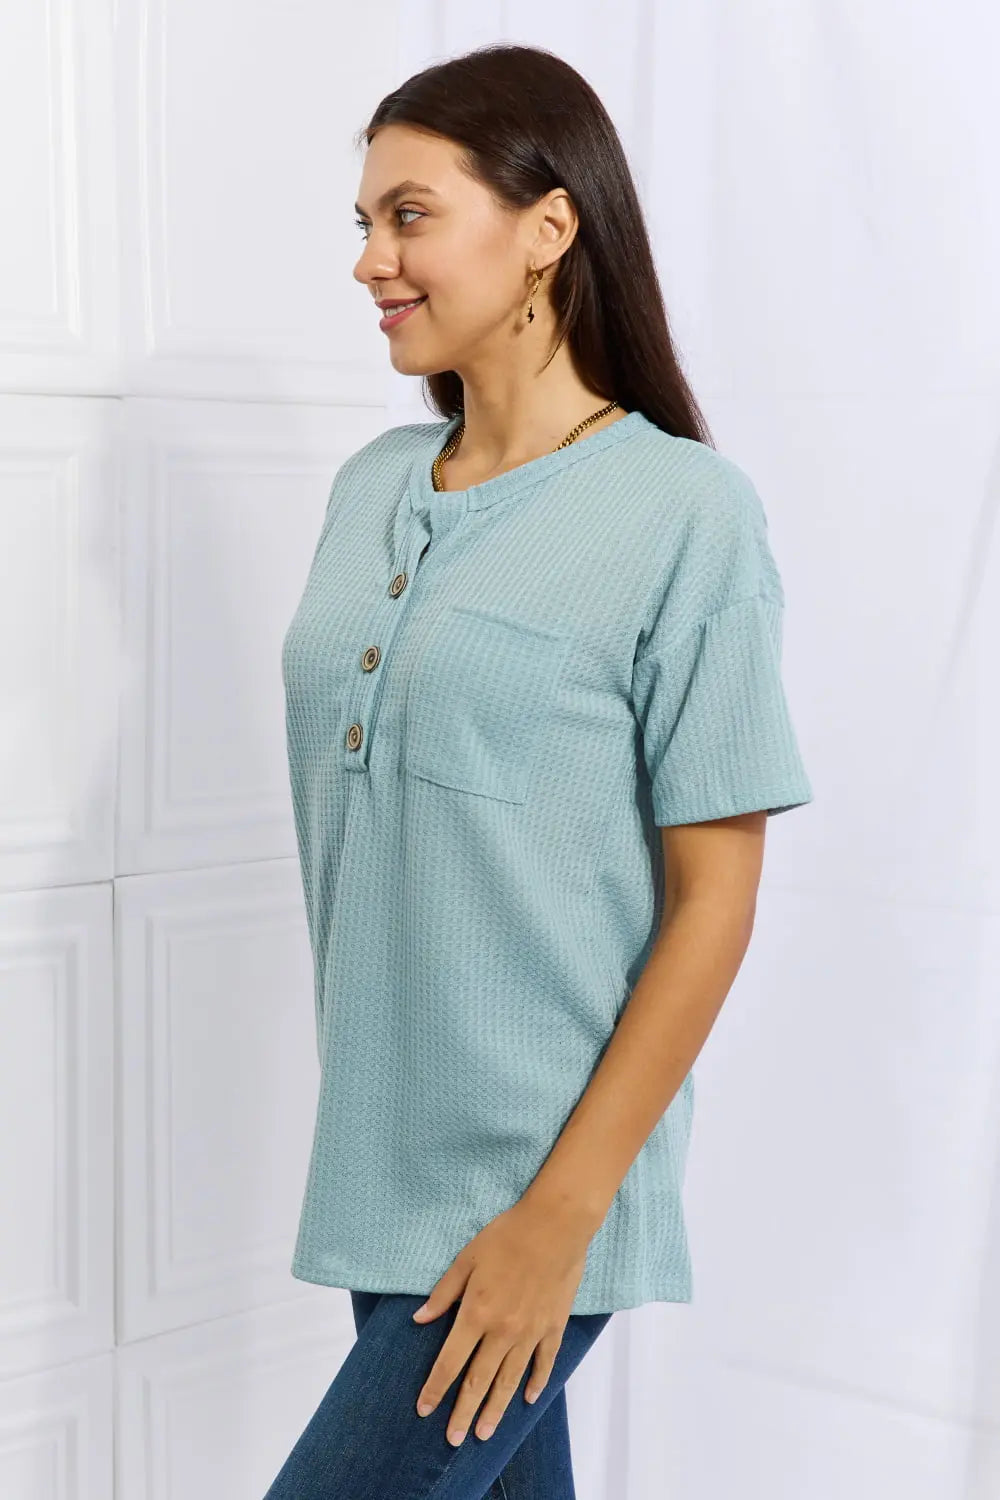 Heimish Made For You Full Size 1/4 Button Down Waffle Top in Blue - Hot Trends